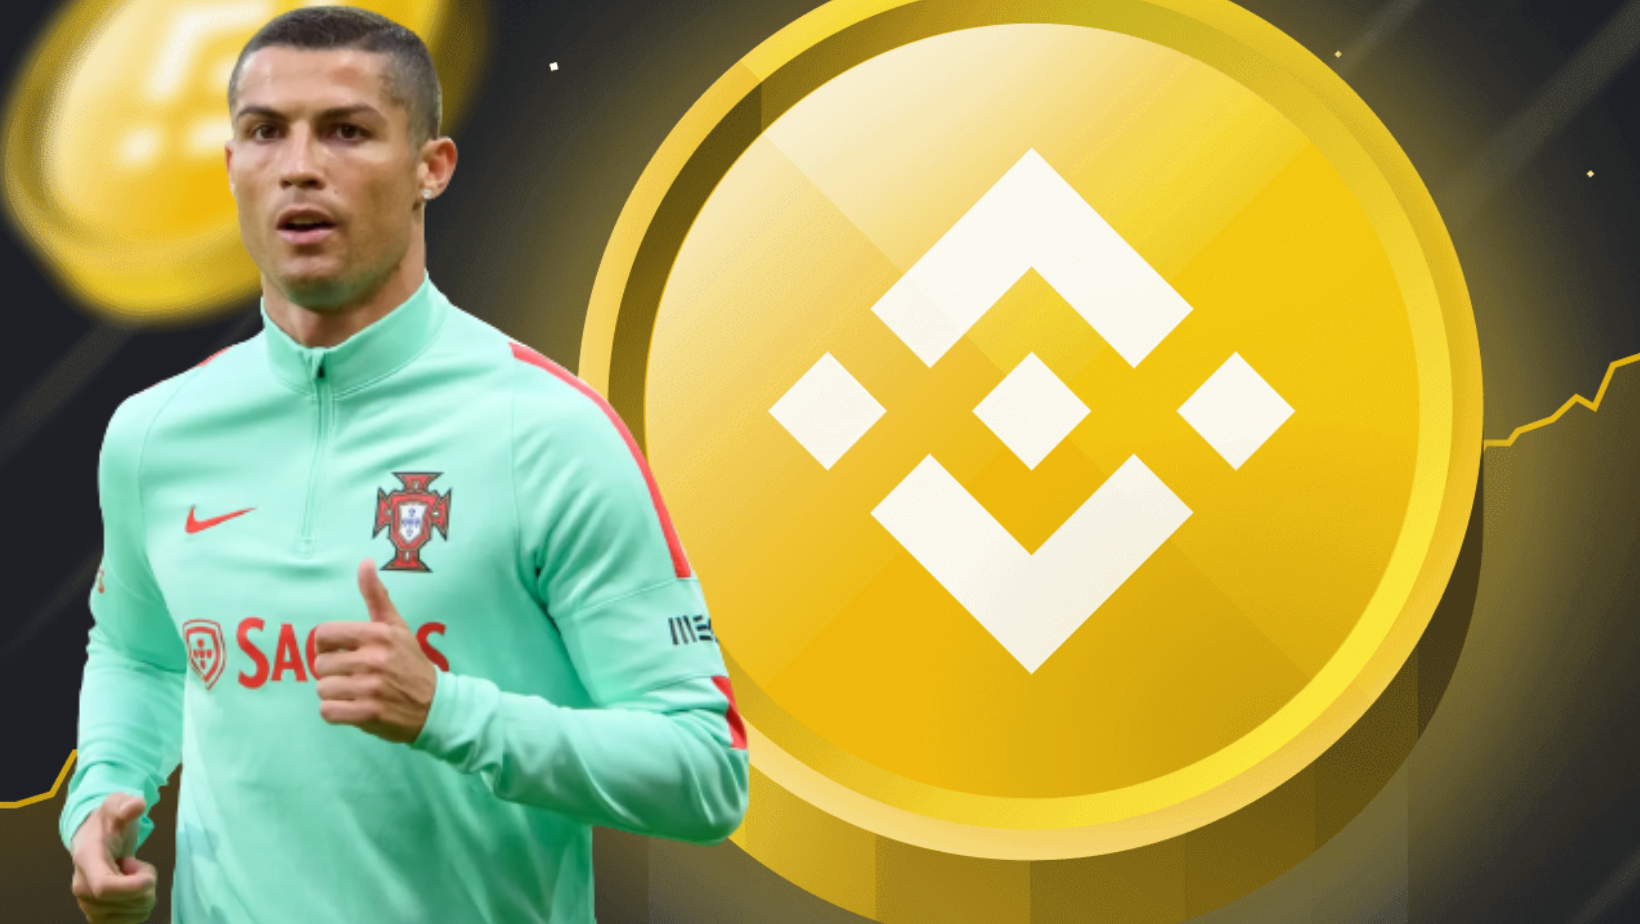 cristiano-ronaldo-partners-with-binance-to-launch-their-first-nft-collection